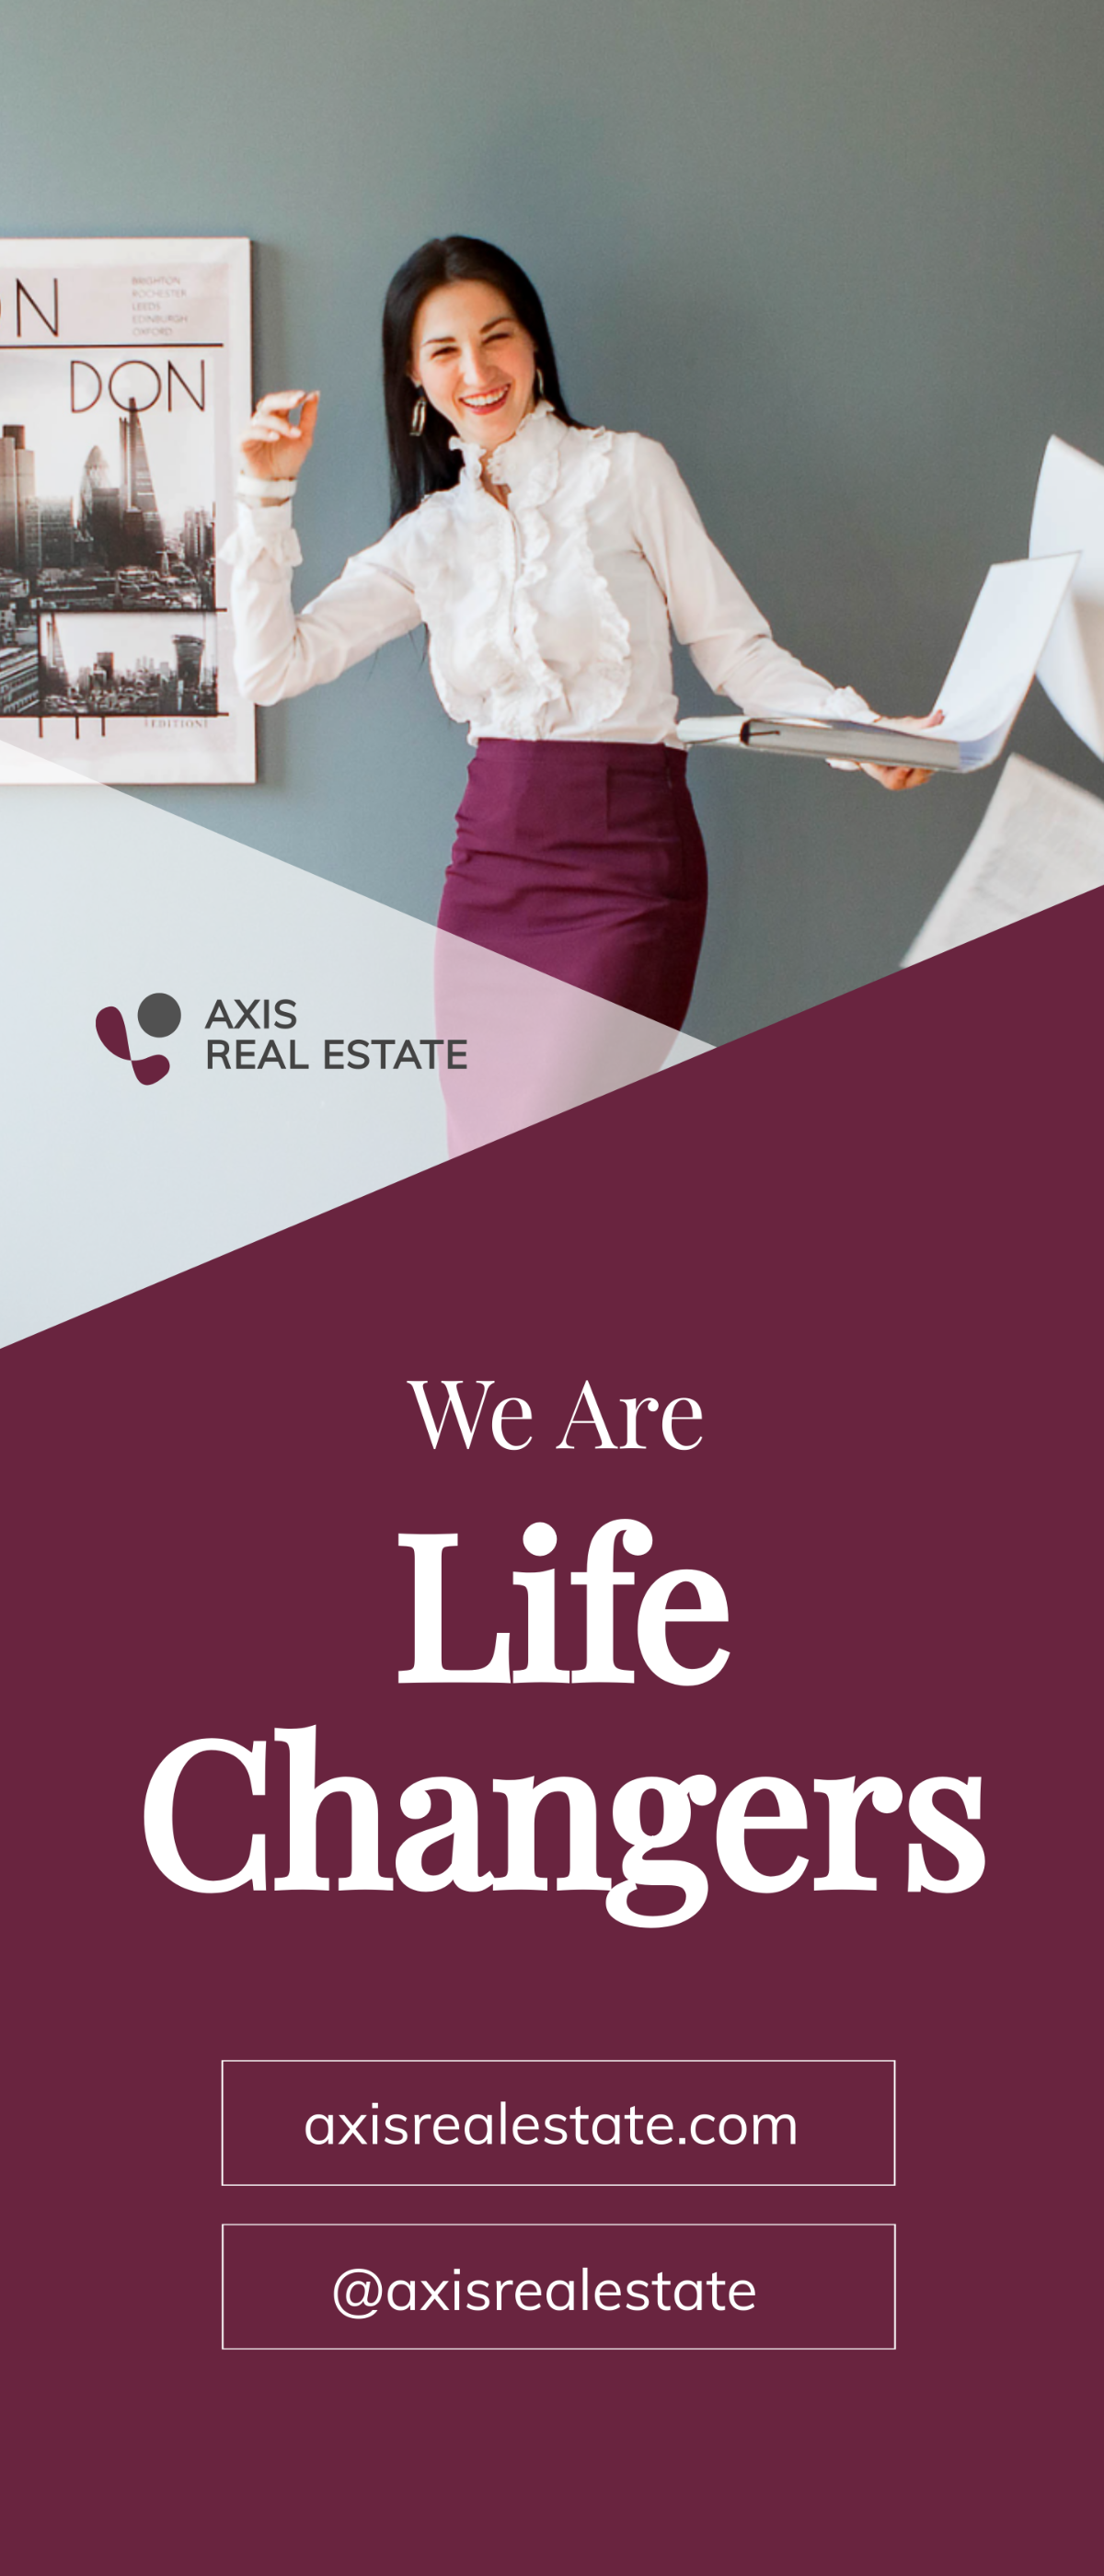 Real Estate Agents Roll Up Banner